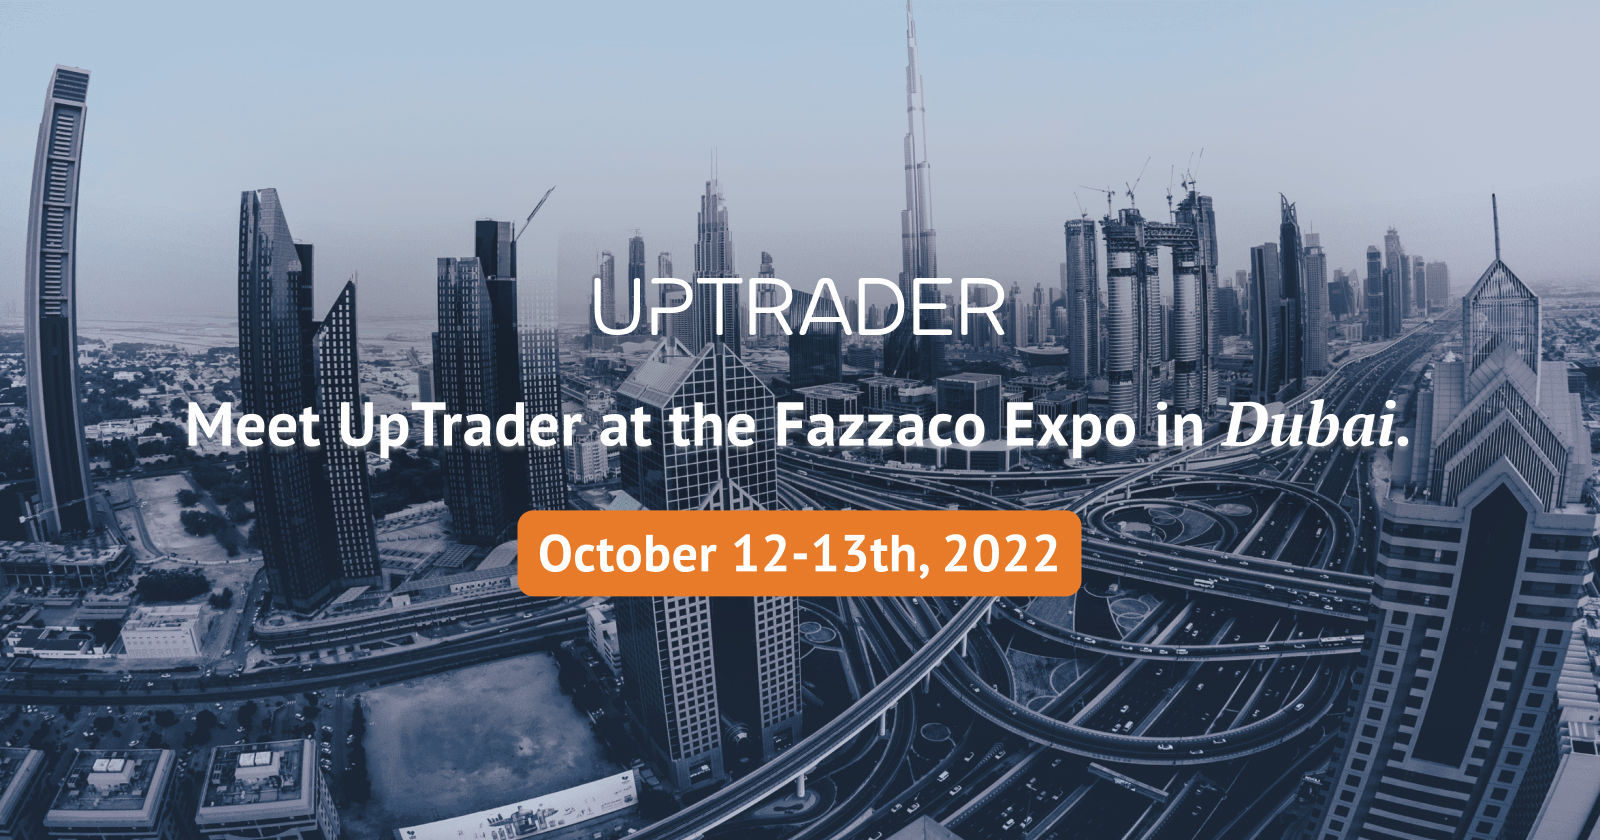 UpTrader is going to visit the Fazzaco Expo in Dubai, October 12-13th